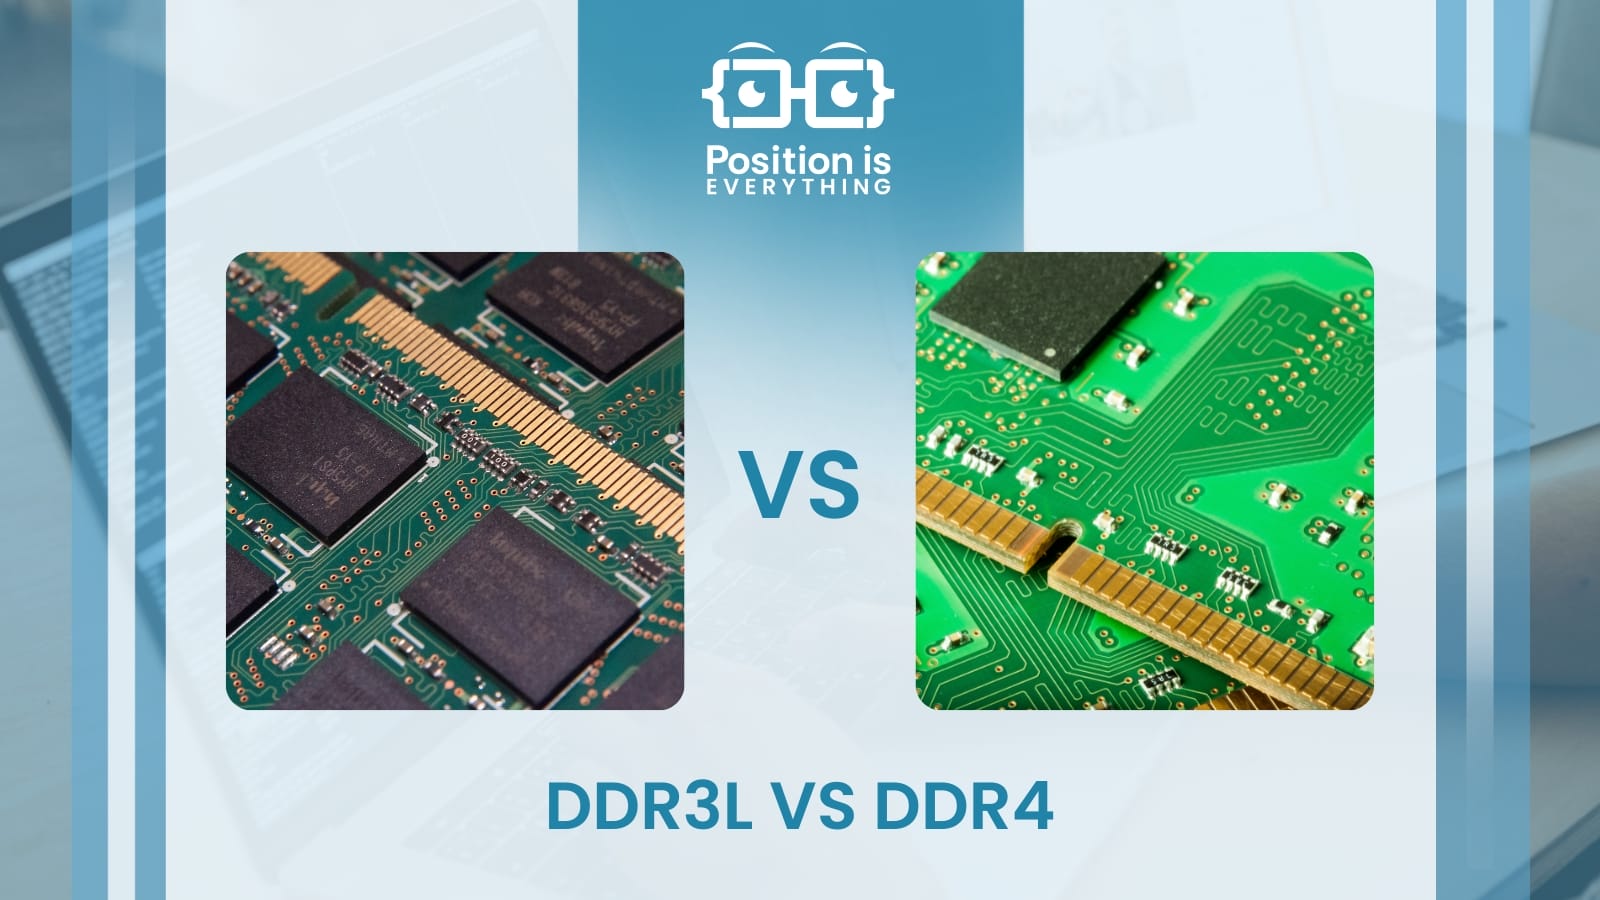 DDR3I vs DDR4: An Insightful Guide To Understand These RAMs